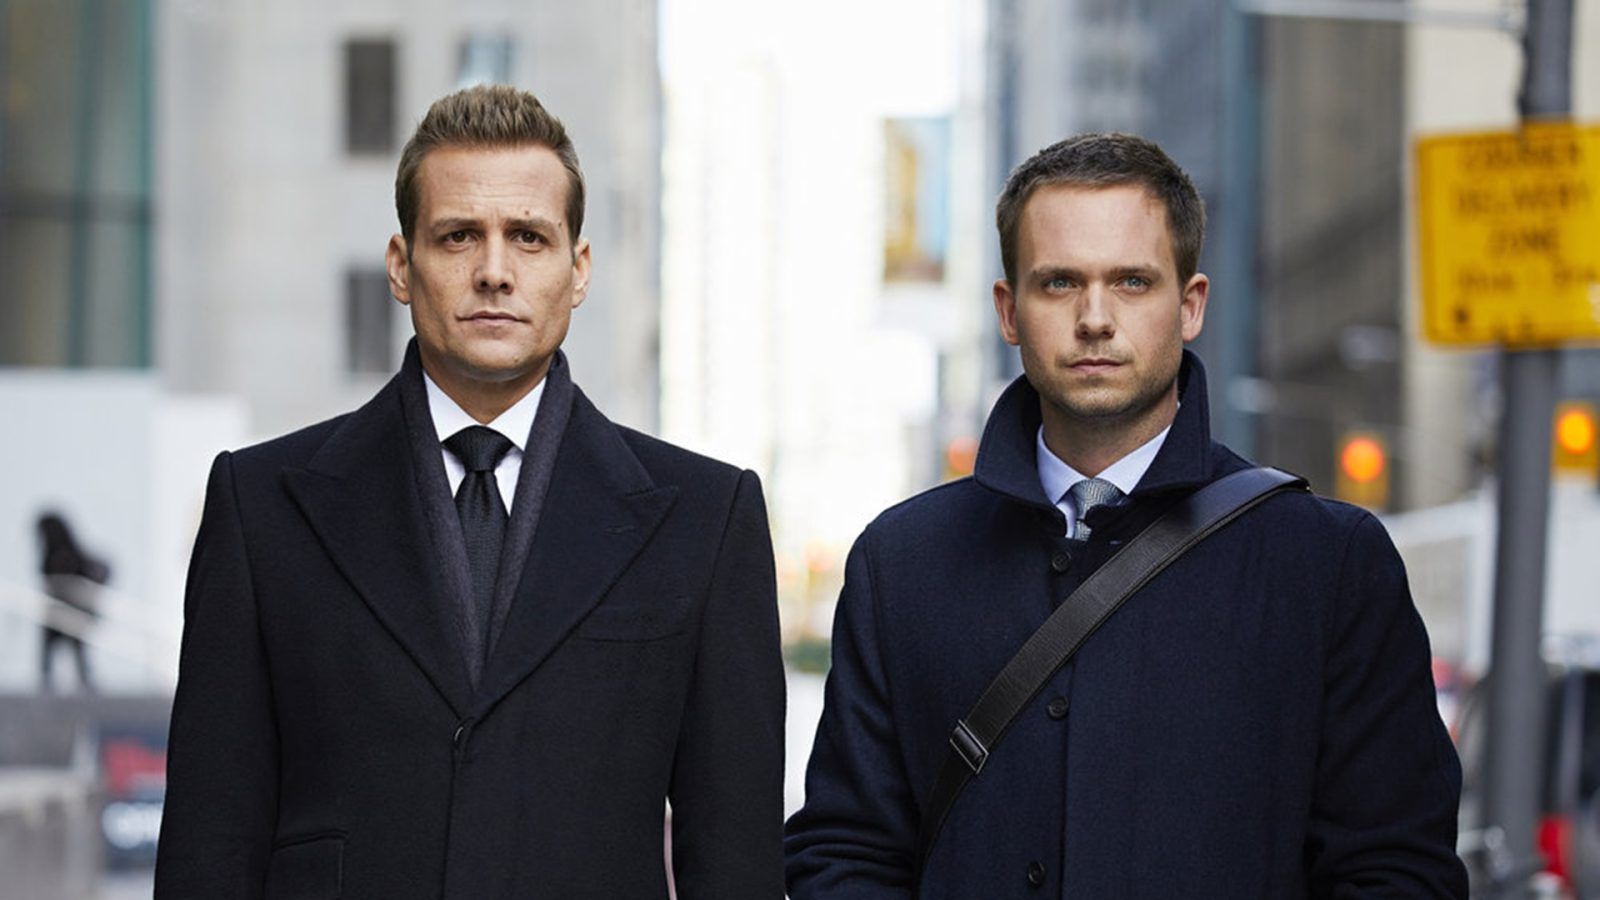 Suits' Once Had Two 'Game of Thrones' Actors as Recurring Stars